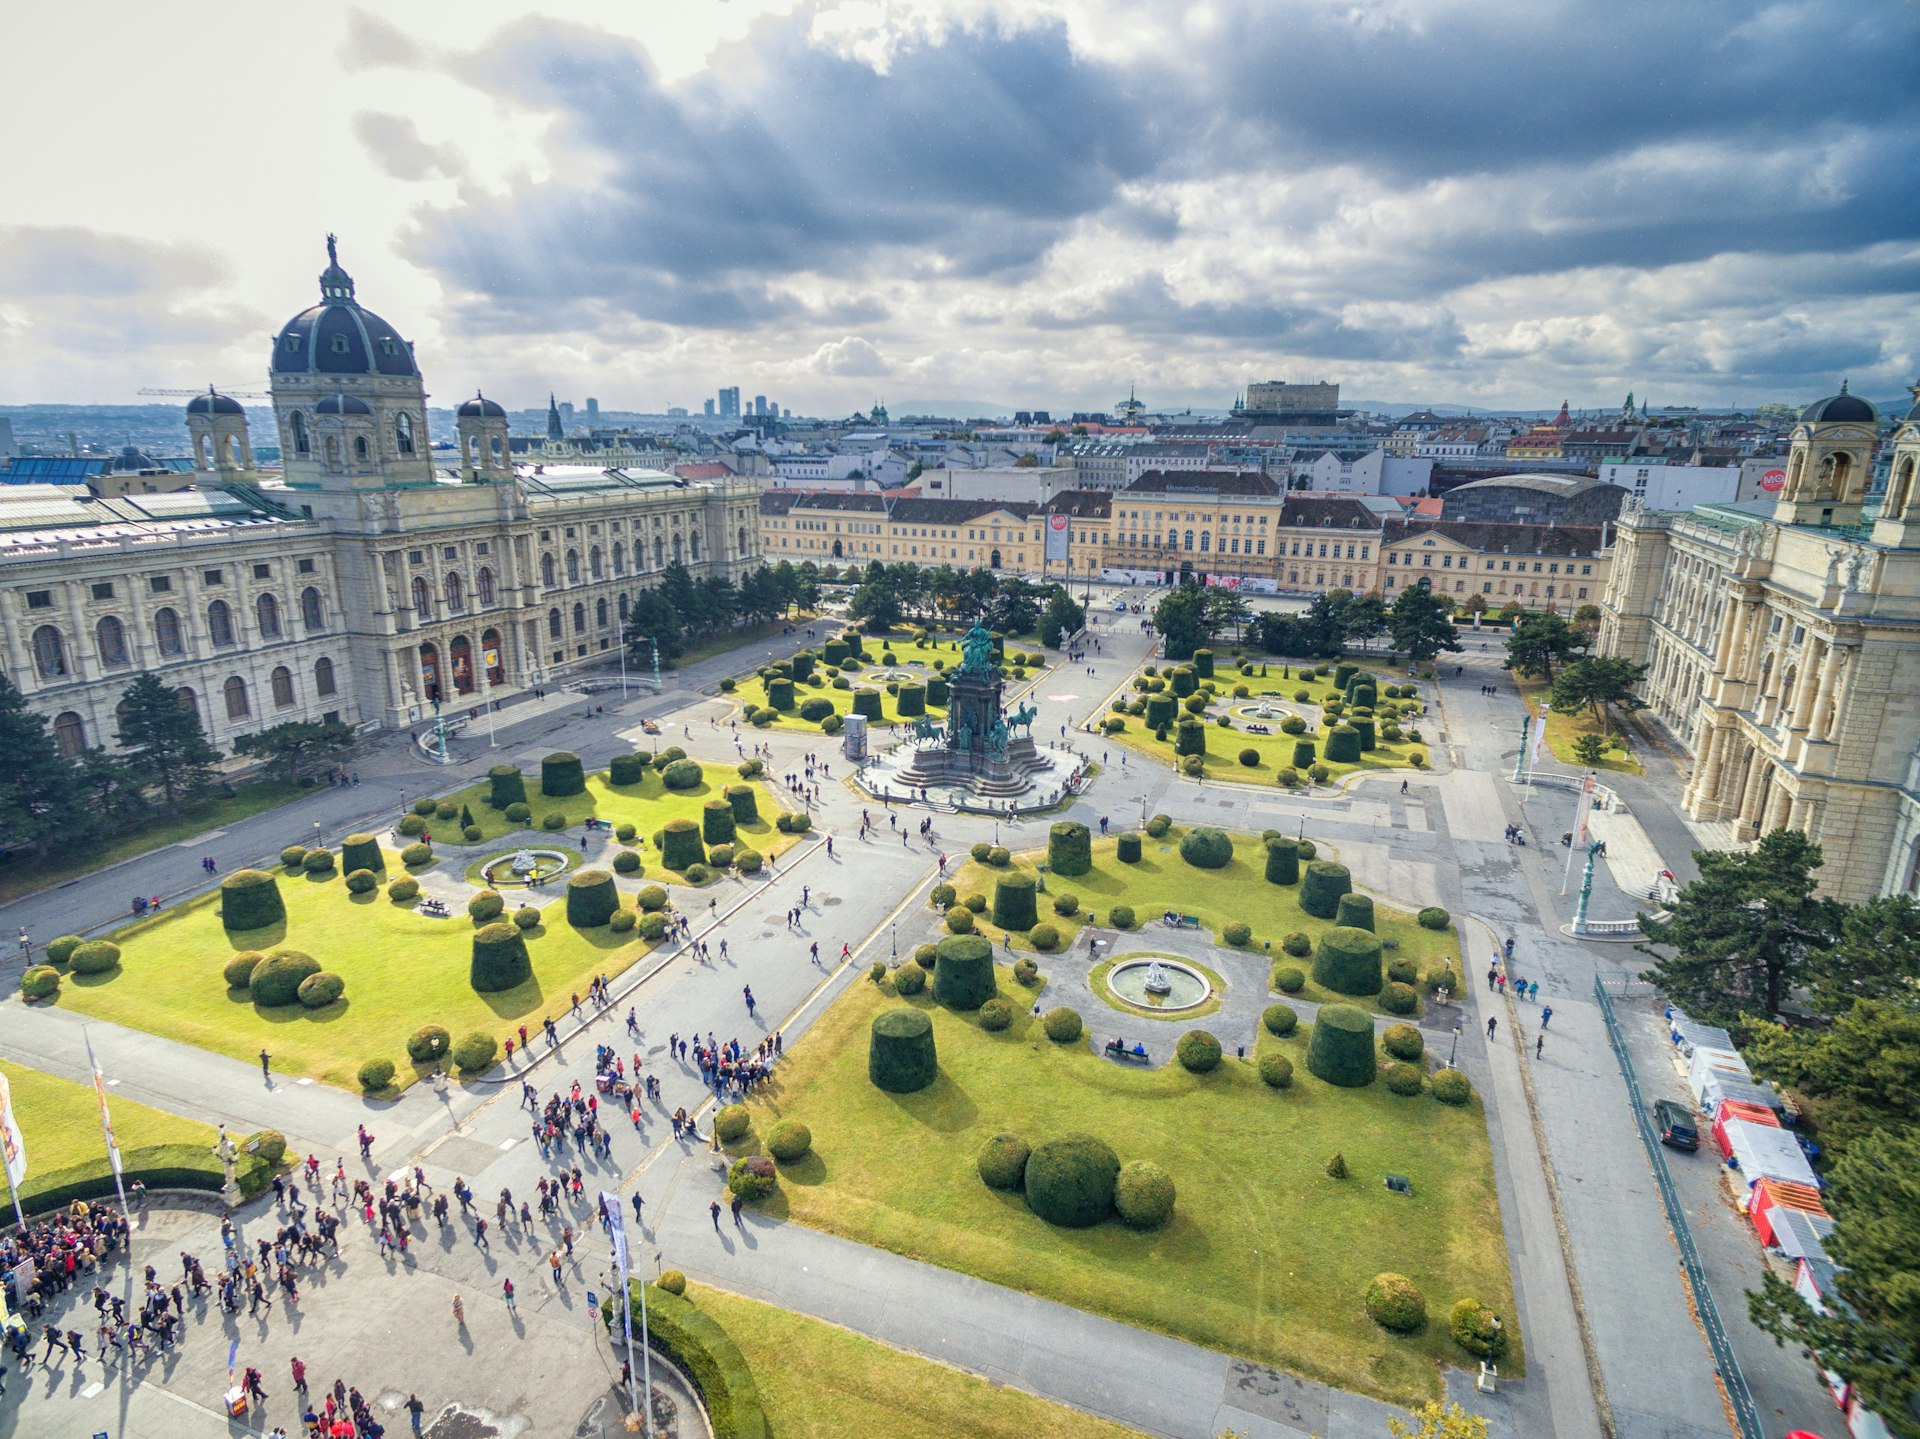 The Museum of Natural History and Maria Theresien Platz seen from above, Vienna, Austria